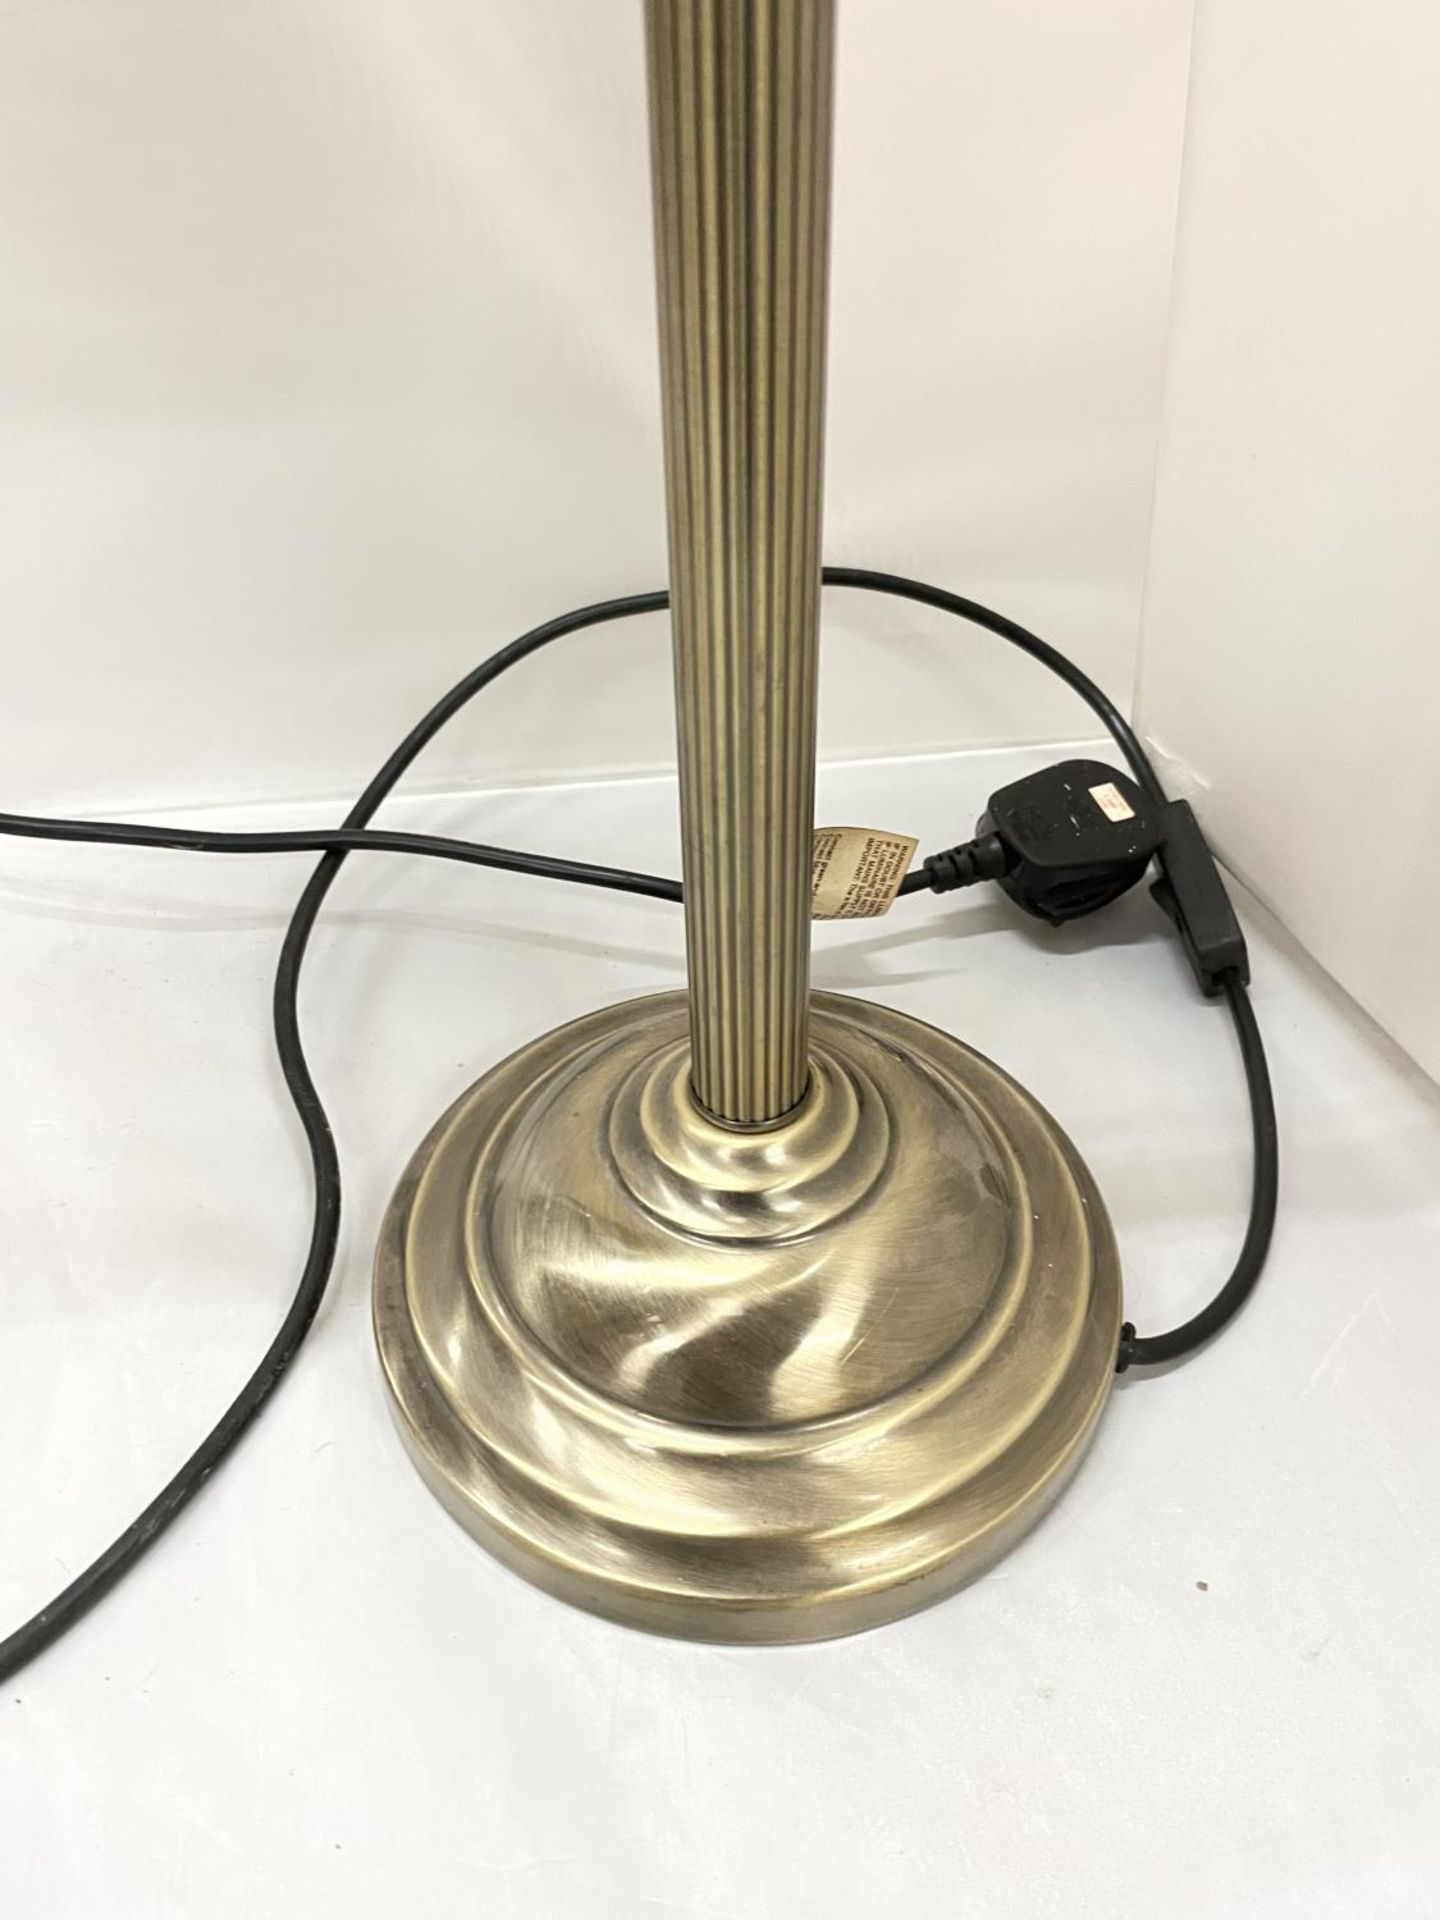 AN ANTIQUE STYLE BRASS DESK LAMP WITH GLASS SHADE - Image 3 of 4